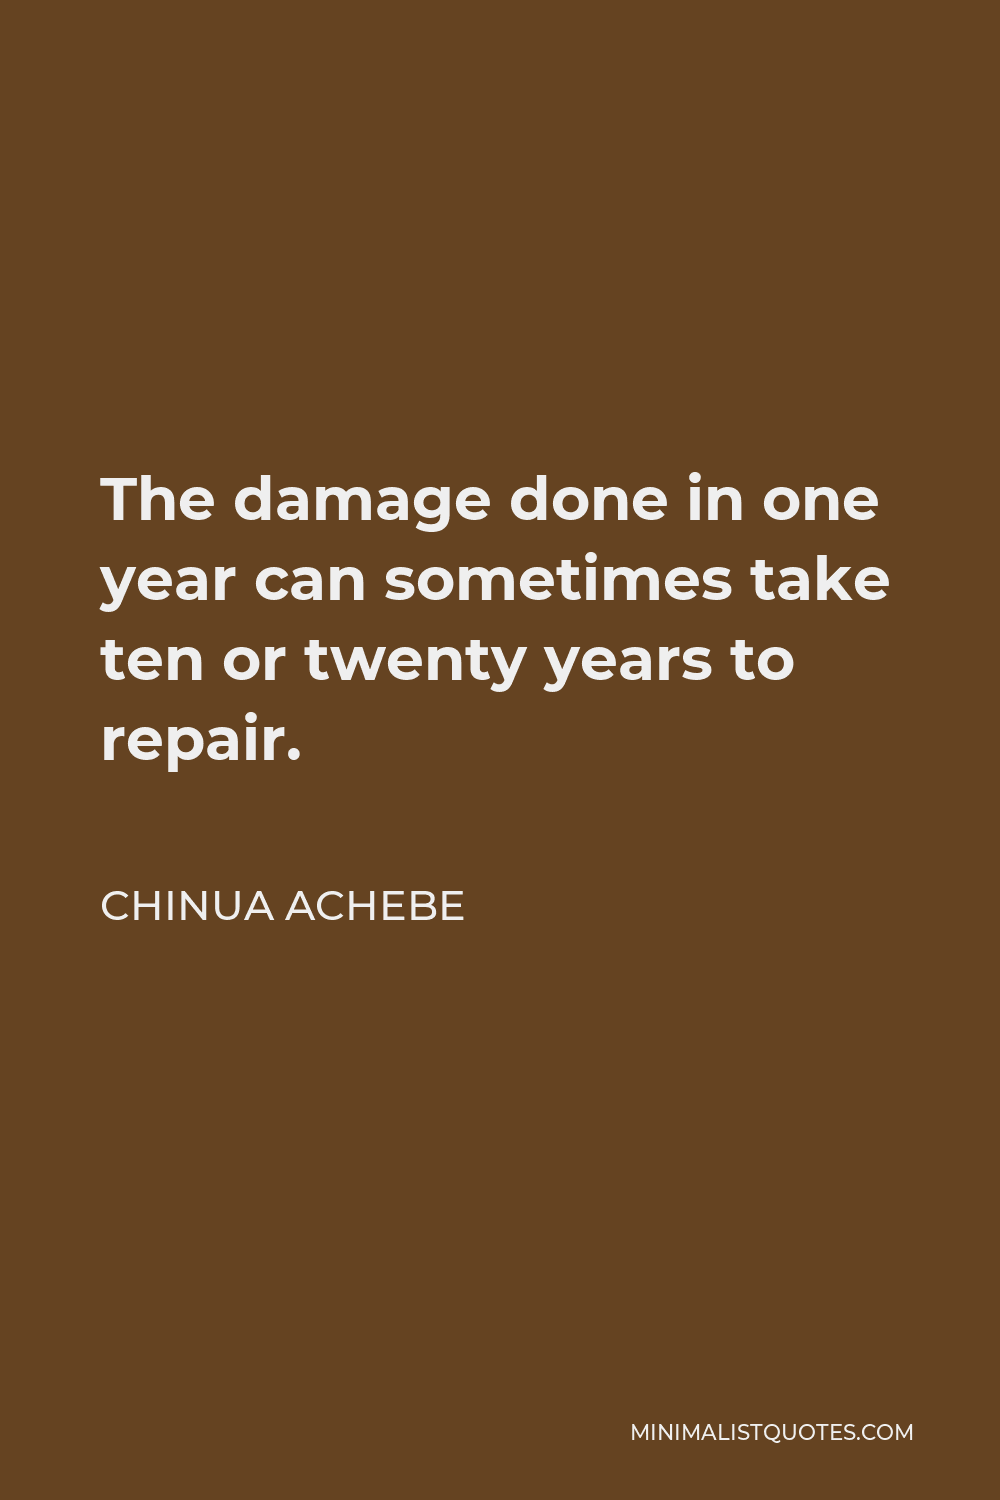 Chinua Achebe Quote - The damage done in one year can sometimes take ten or twenty years to repair.